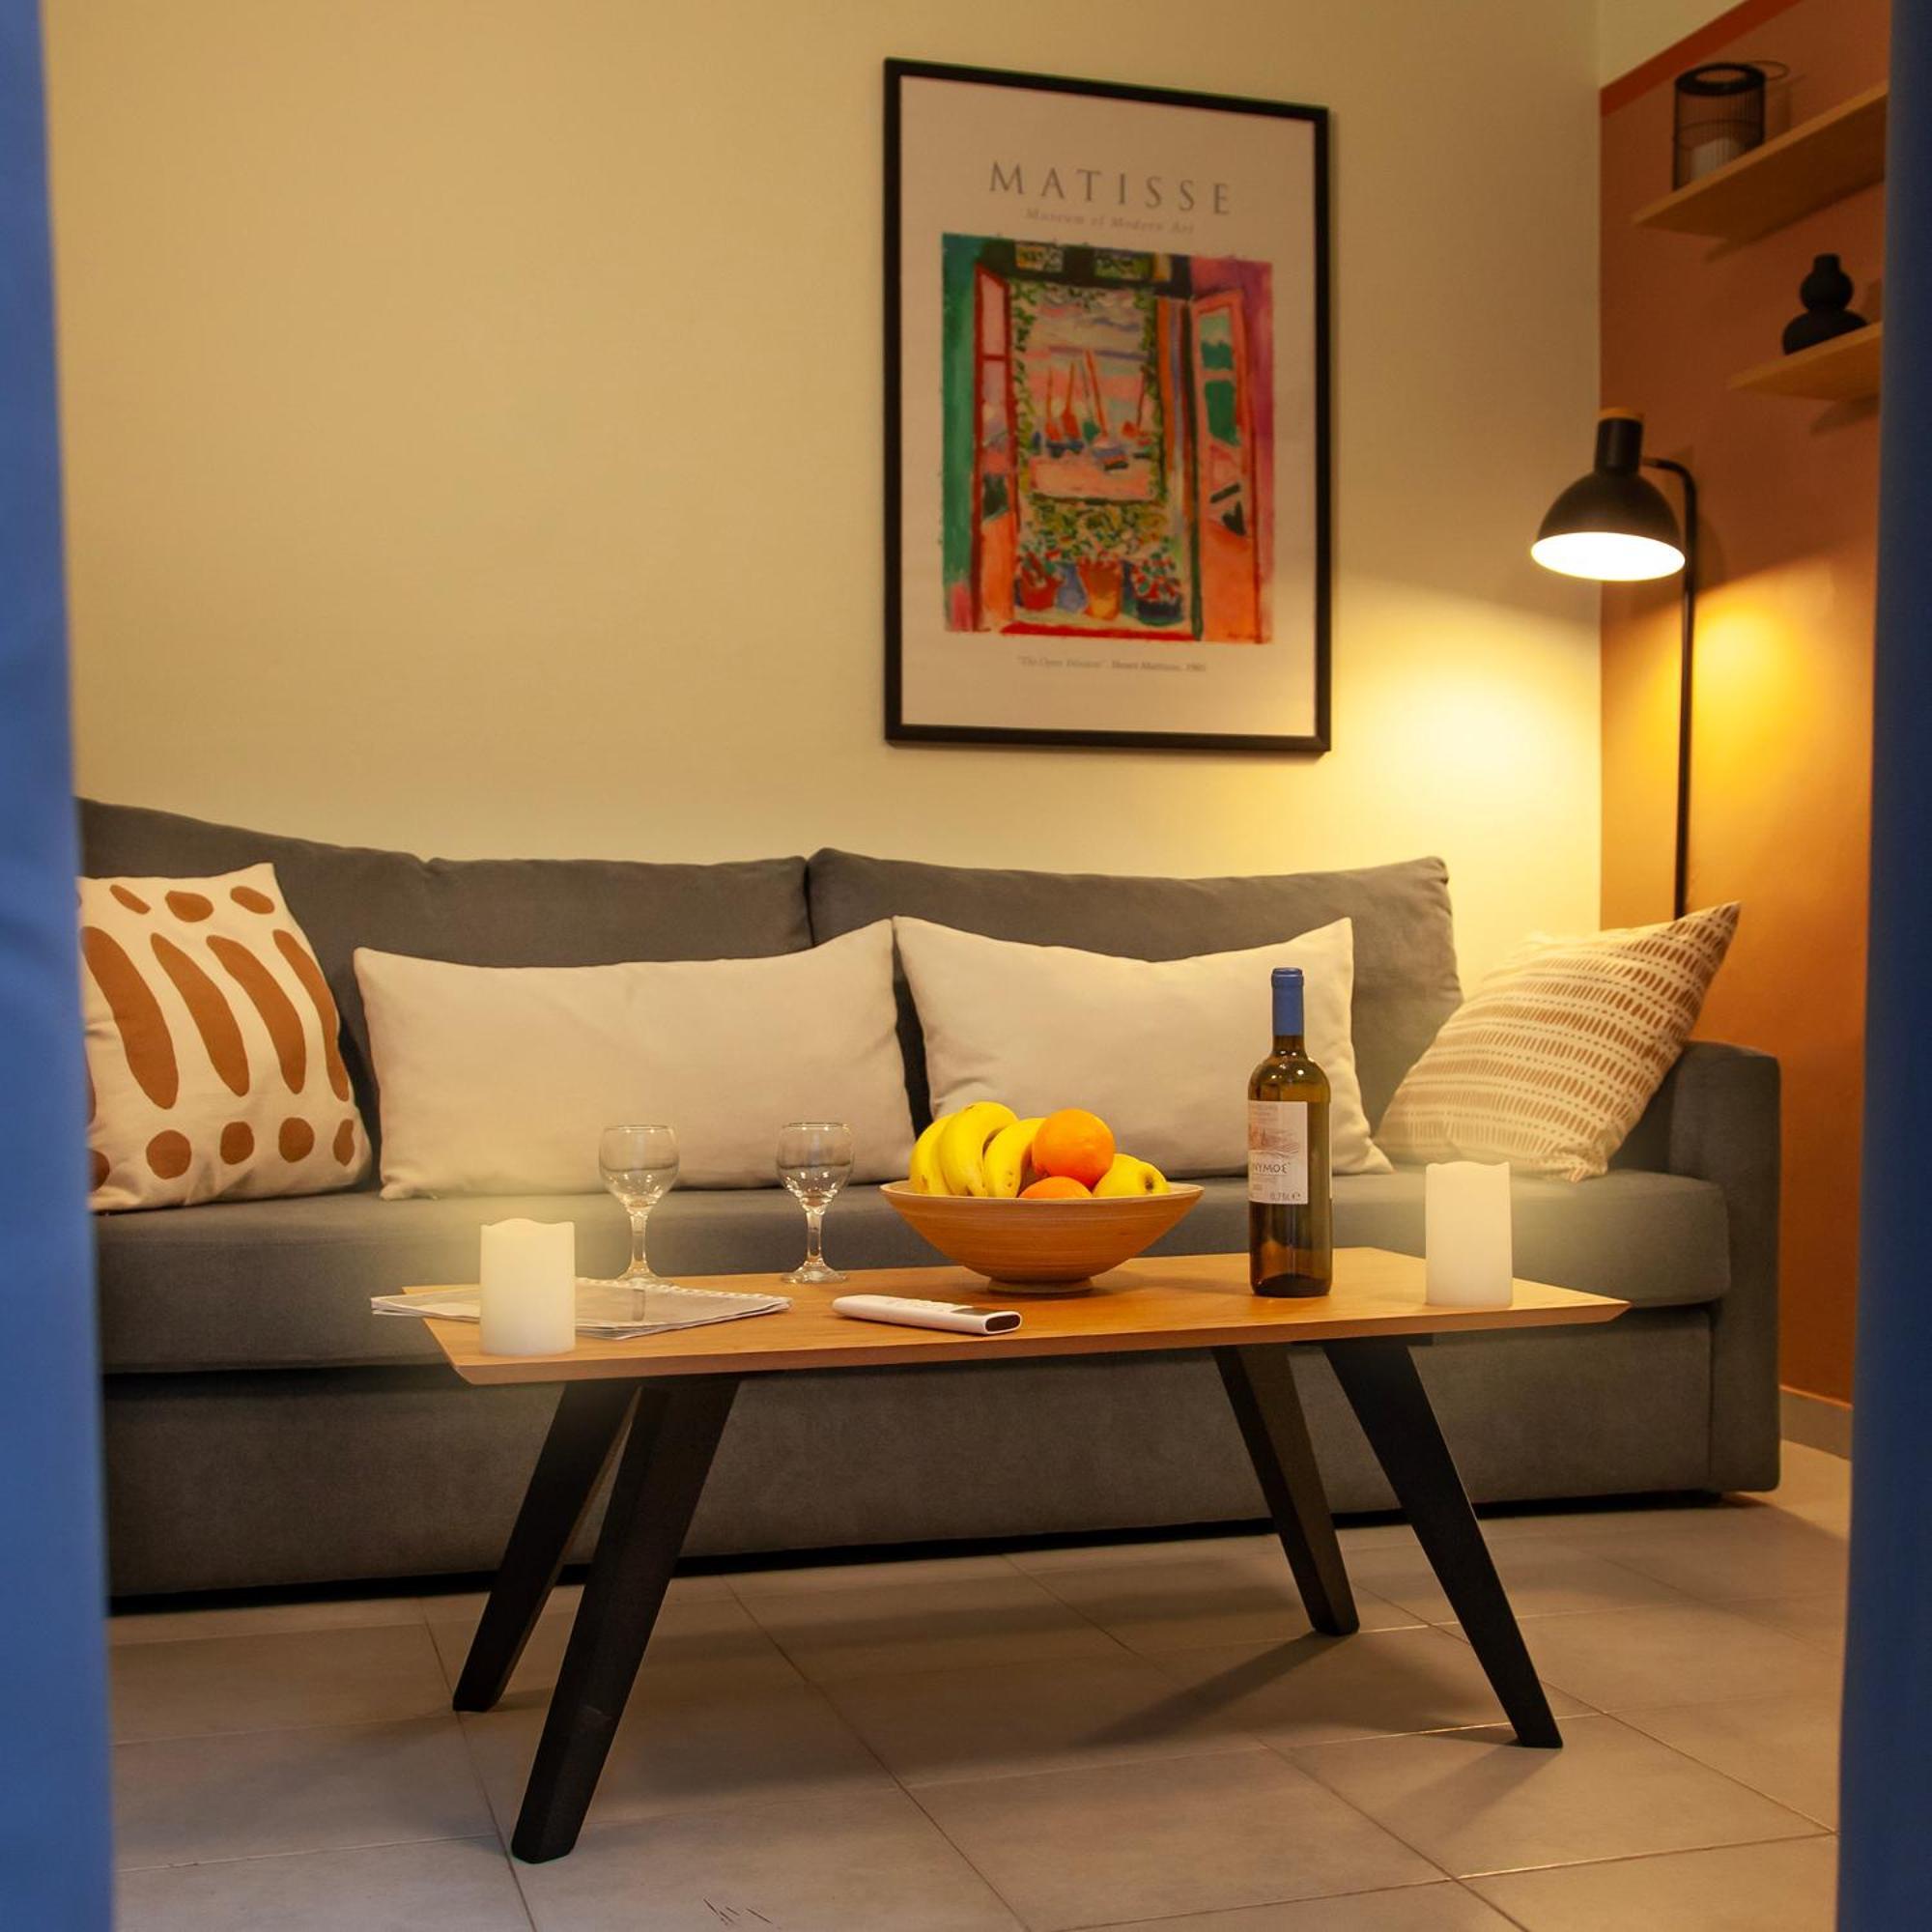 Aris123 By Smart Cozy Suites - Apartments In The Heart Of Athens - 5 Minutes From Metro - Available 24Hr Zewnętrze zdjęcie